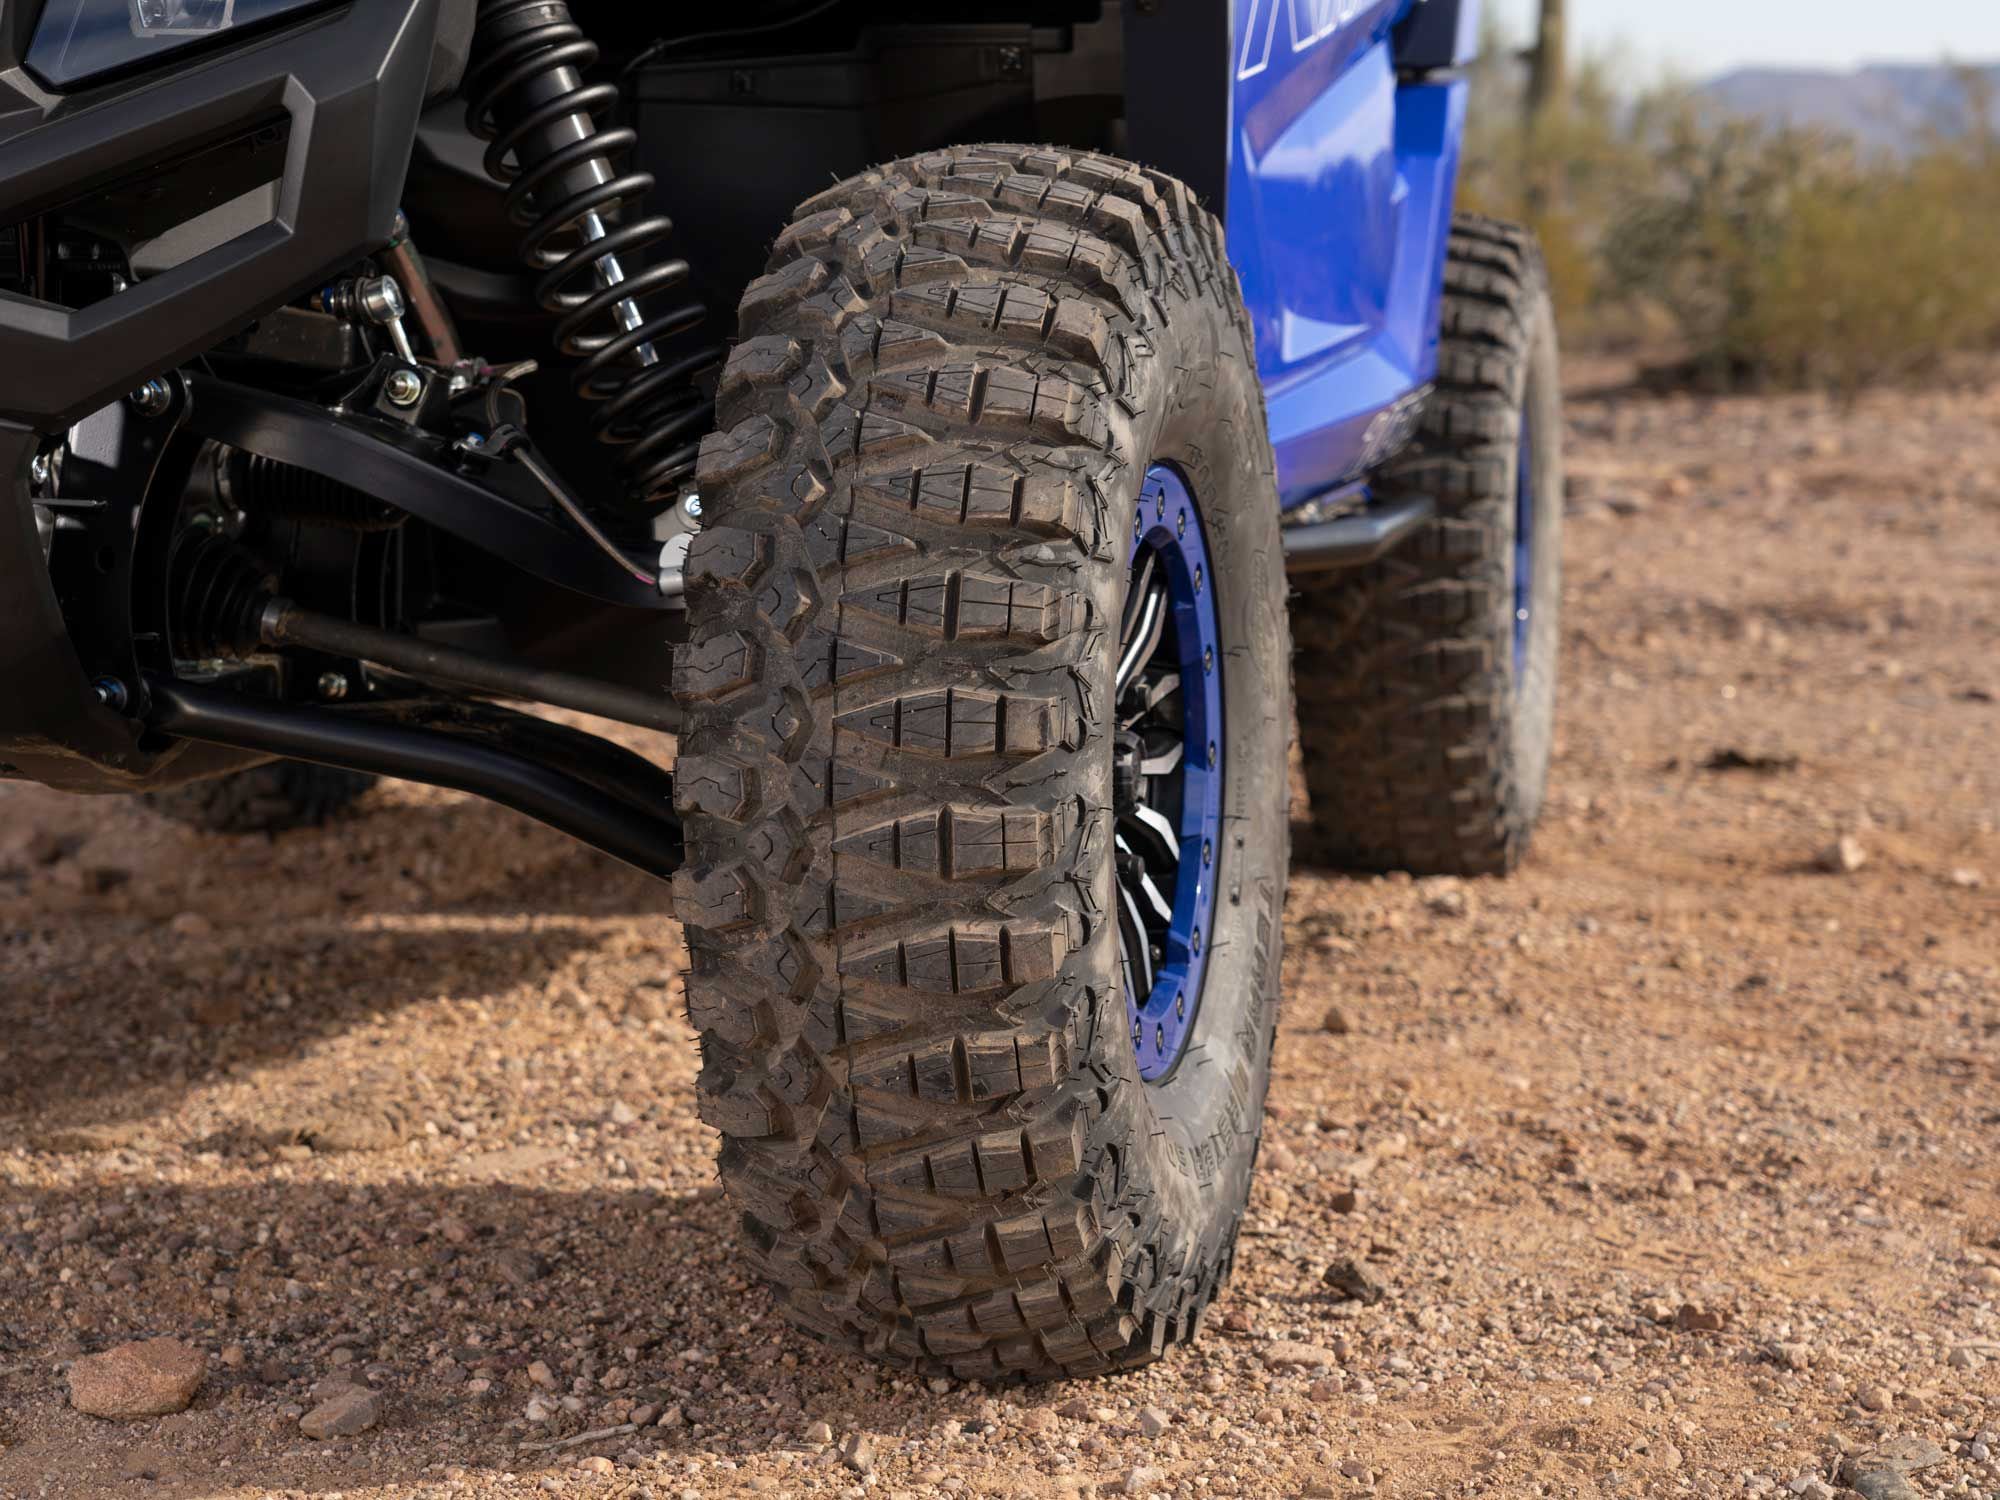 GBC Terra Master SQ tires have an exclusive A- and B-side for hard- or soft-terrain selection. The tires come mounted on beadlock wheels.